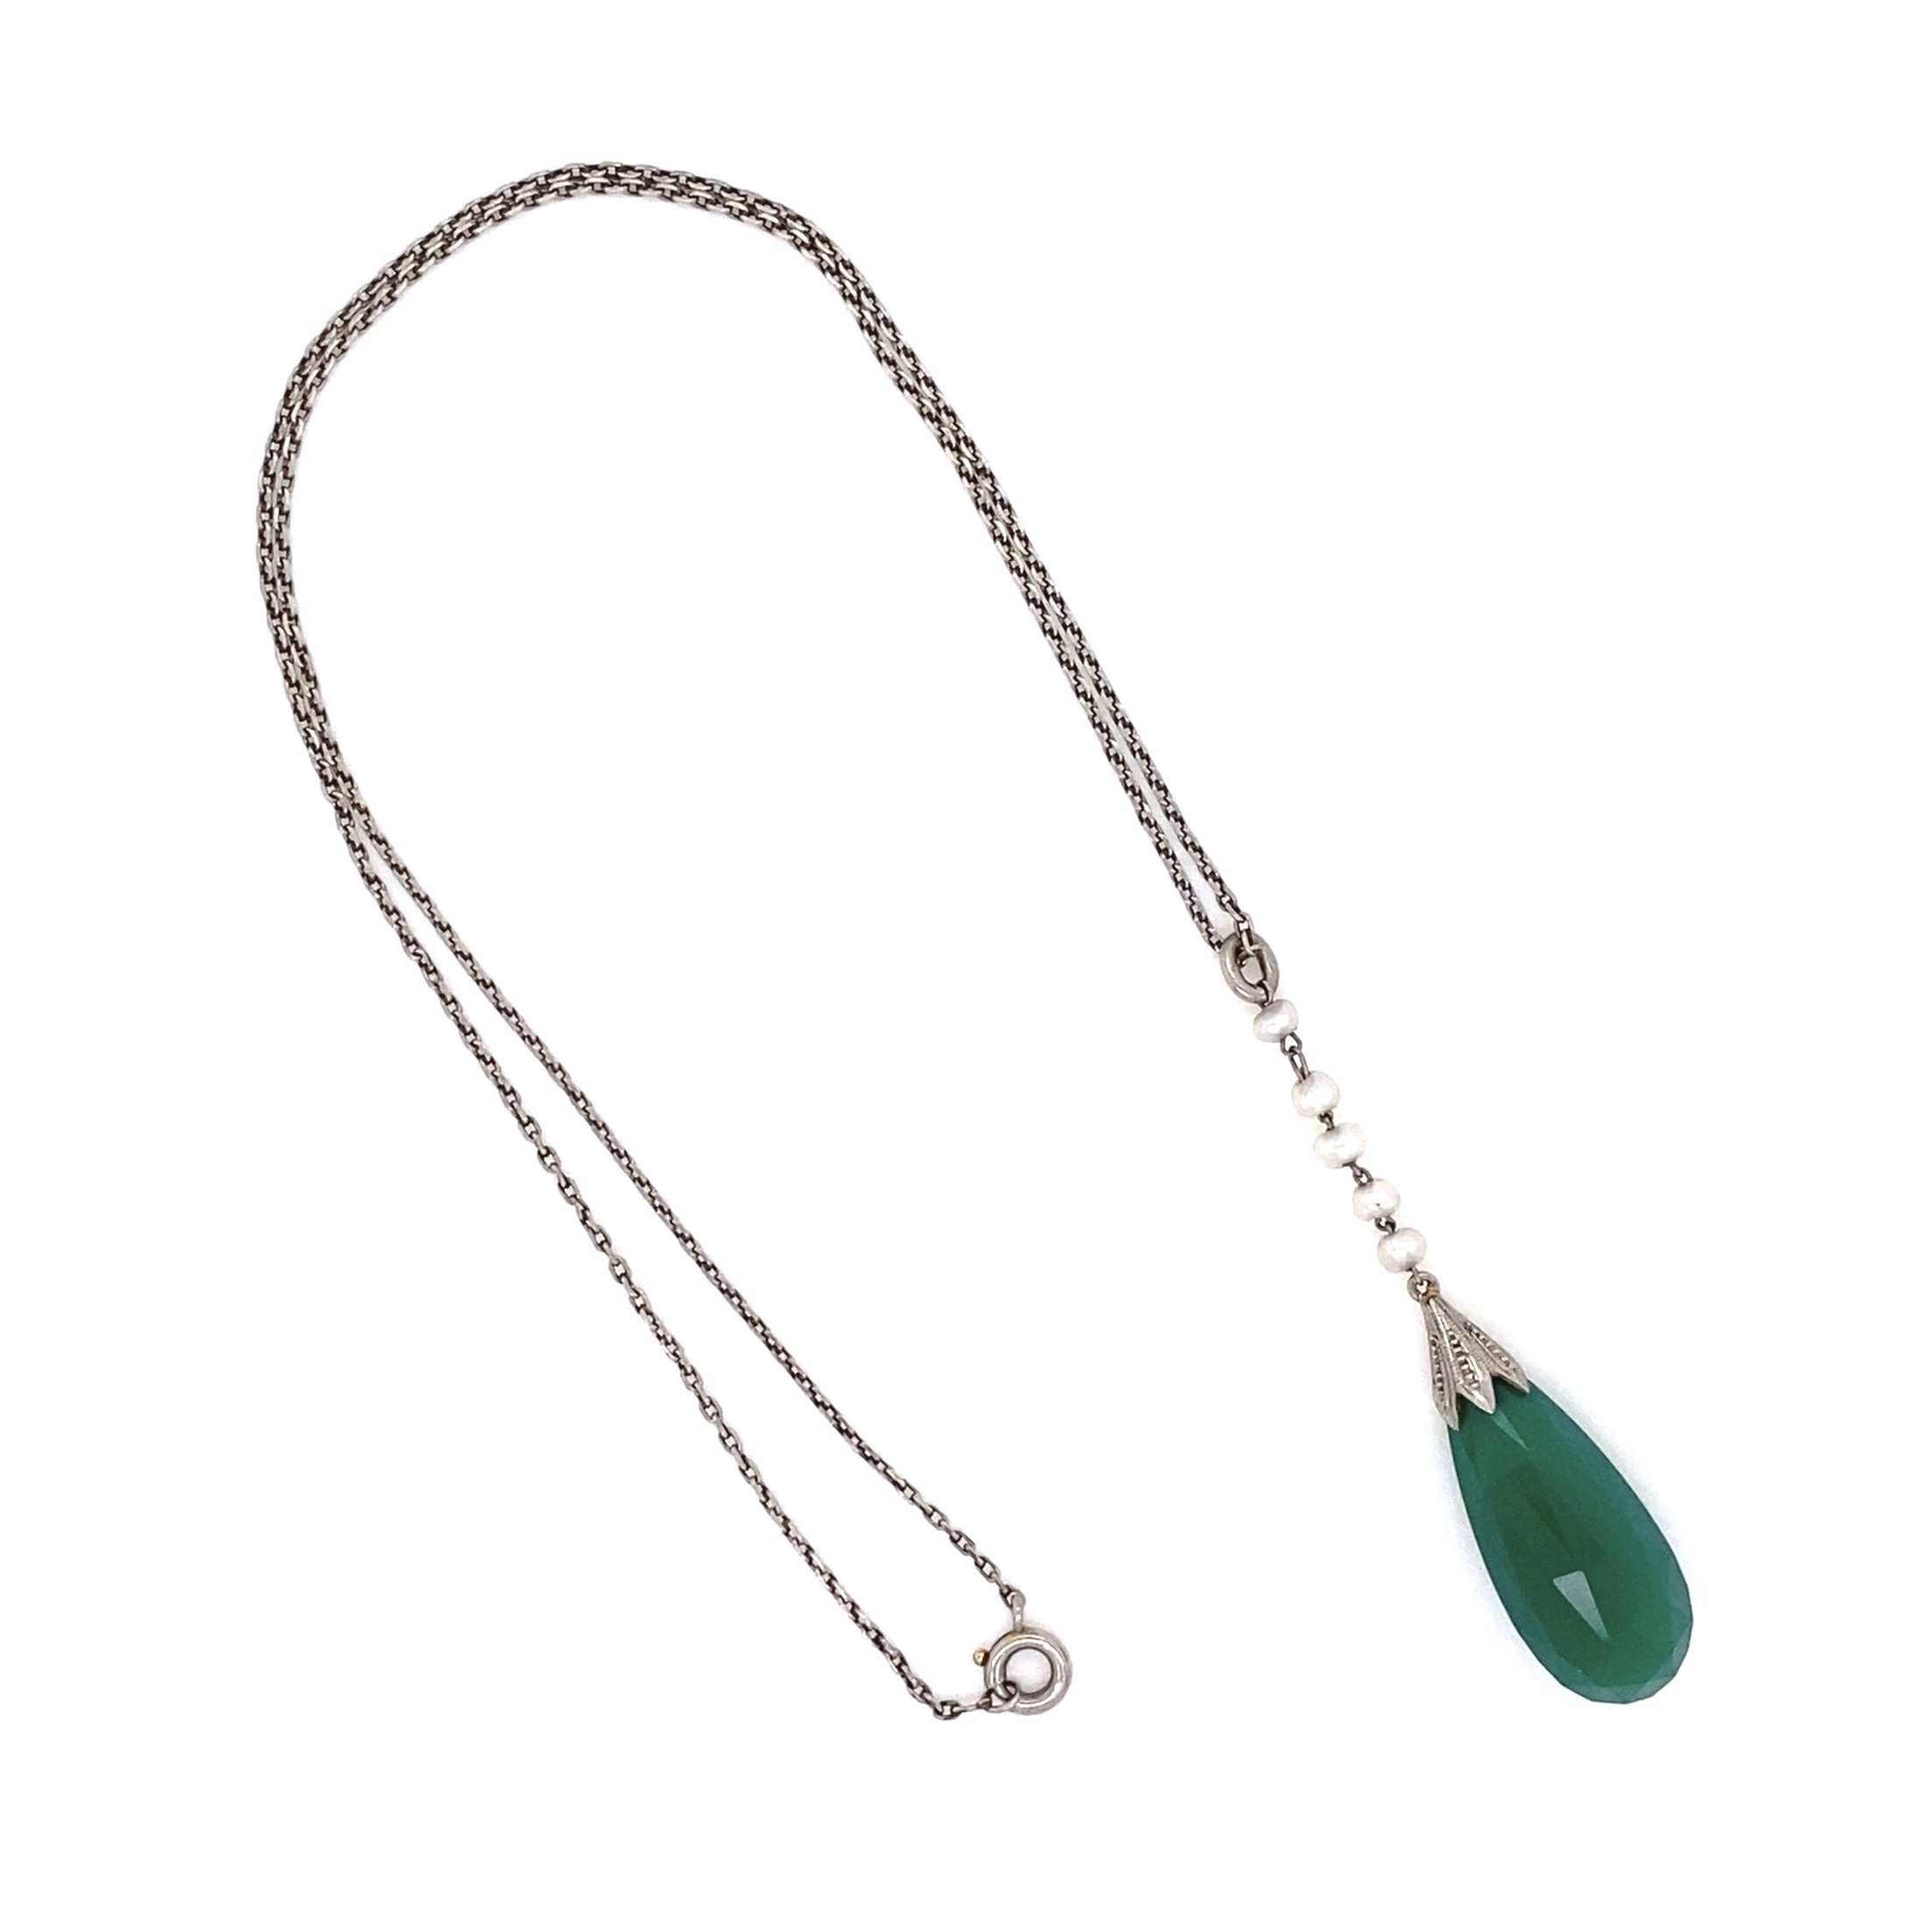 Platinum Chrysoprase Teardrop & Seed Pearl Necklace 4.5g, 14"